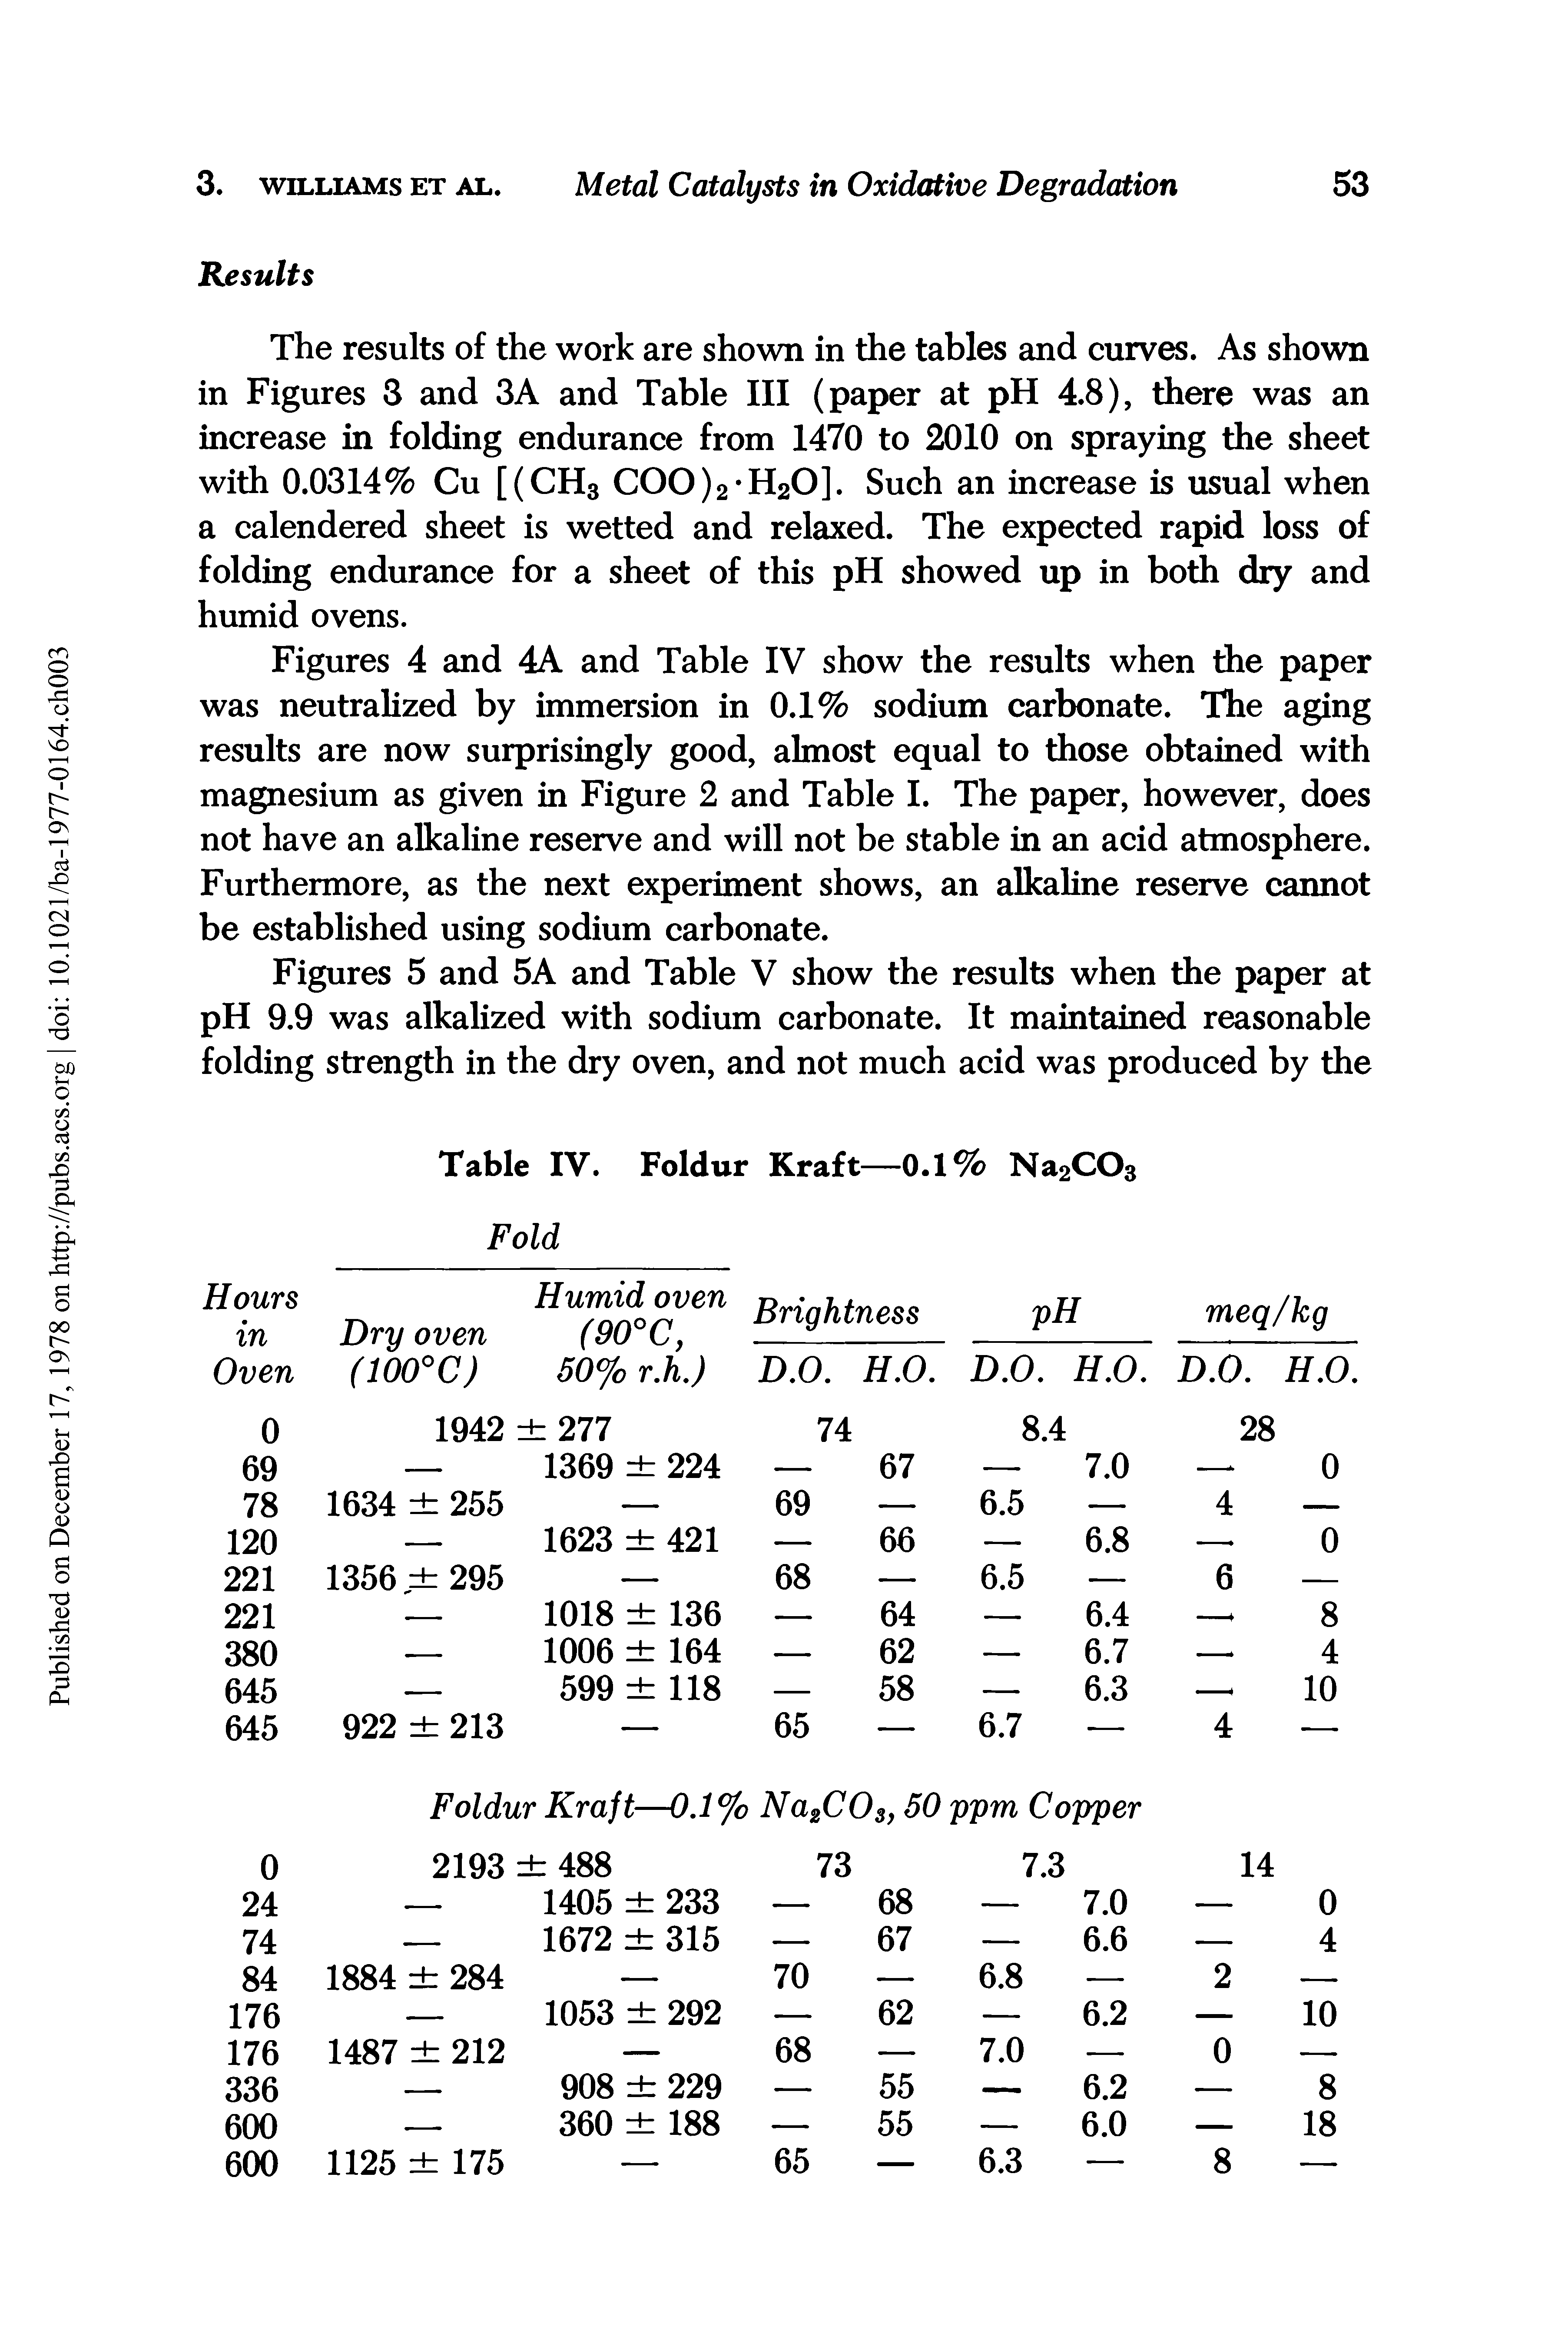 Figures 4 and 4A and Table IV show the results when the paper was neutralized by immersion in 0.1% sodium carbonate. The aging results are now surprisingly good, almost equal to those obtained with magnesium as given in Figure 2 and Table I. The paper, however, does not have an alkaline reserve and will not be stable in an acid atmosphere. Furthermore, as the next experiment shows, an alkaline reserve cannot be established using sodium carbonate.